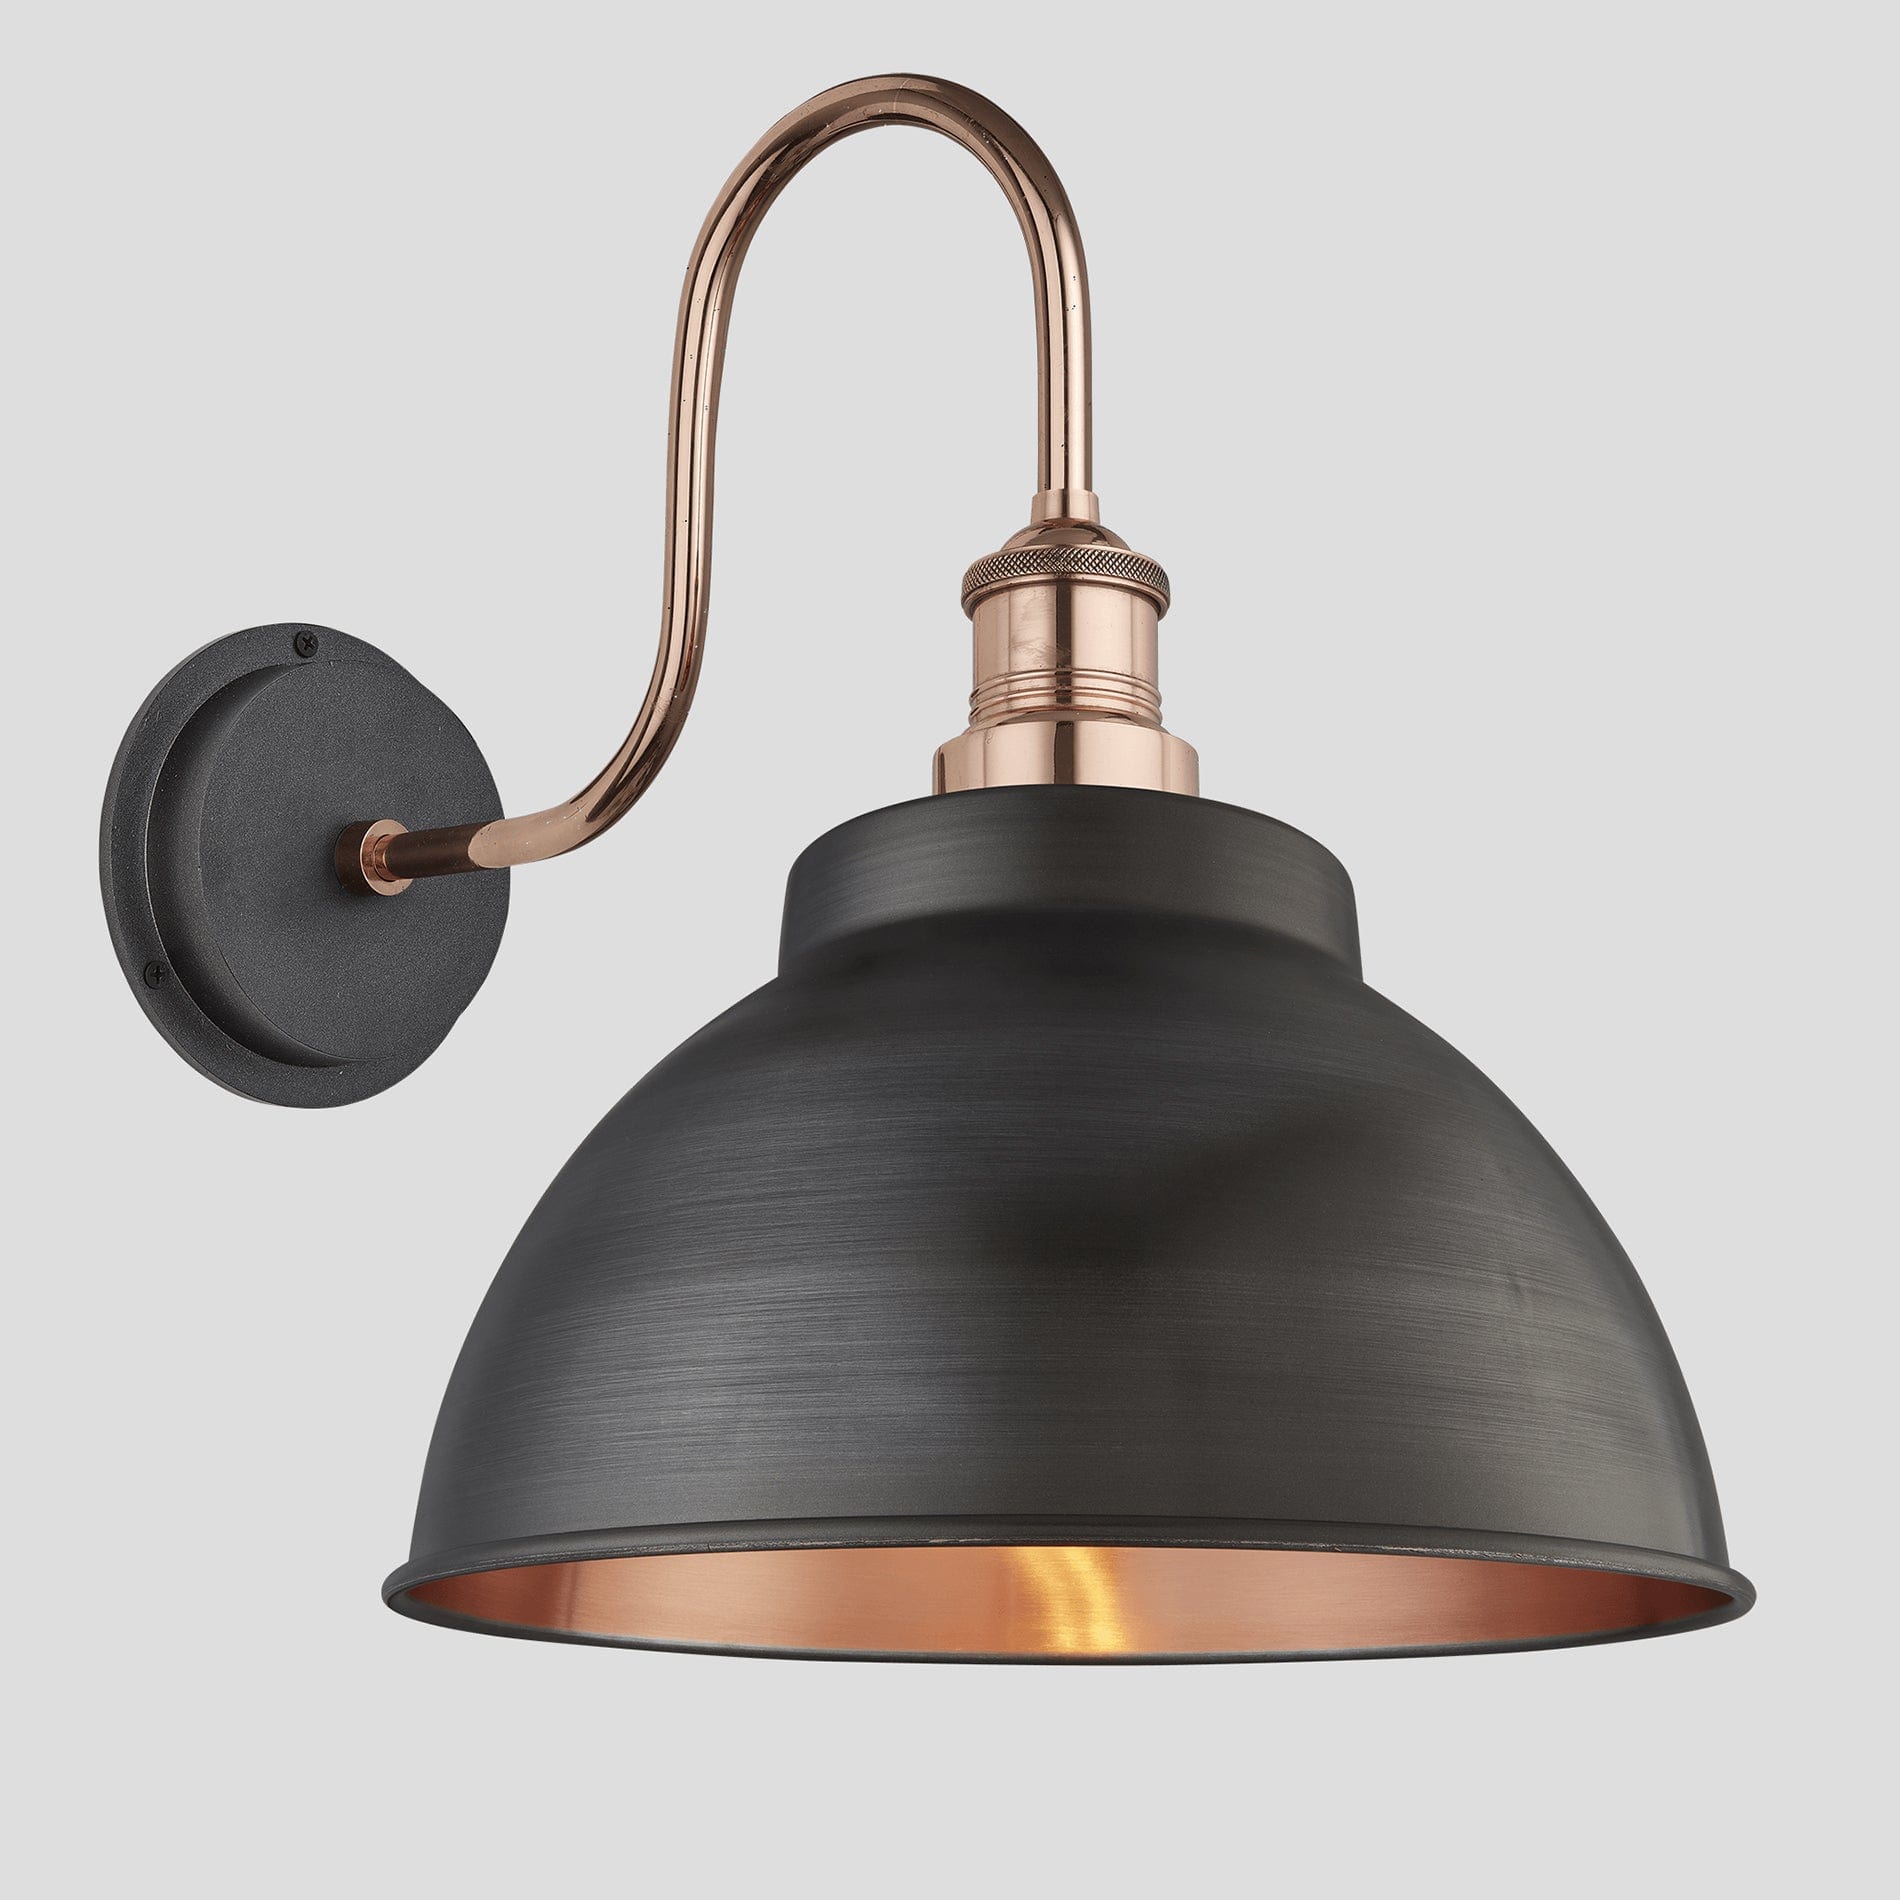 Swan Neck Outdoor & Bathroom Dome Wall Light - 13 Inch - Pewter & Copper Industville SN-IP65-DWL13-CP-CH